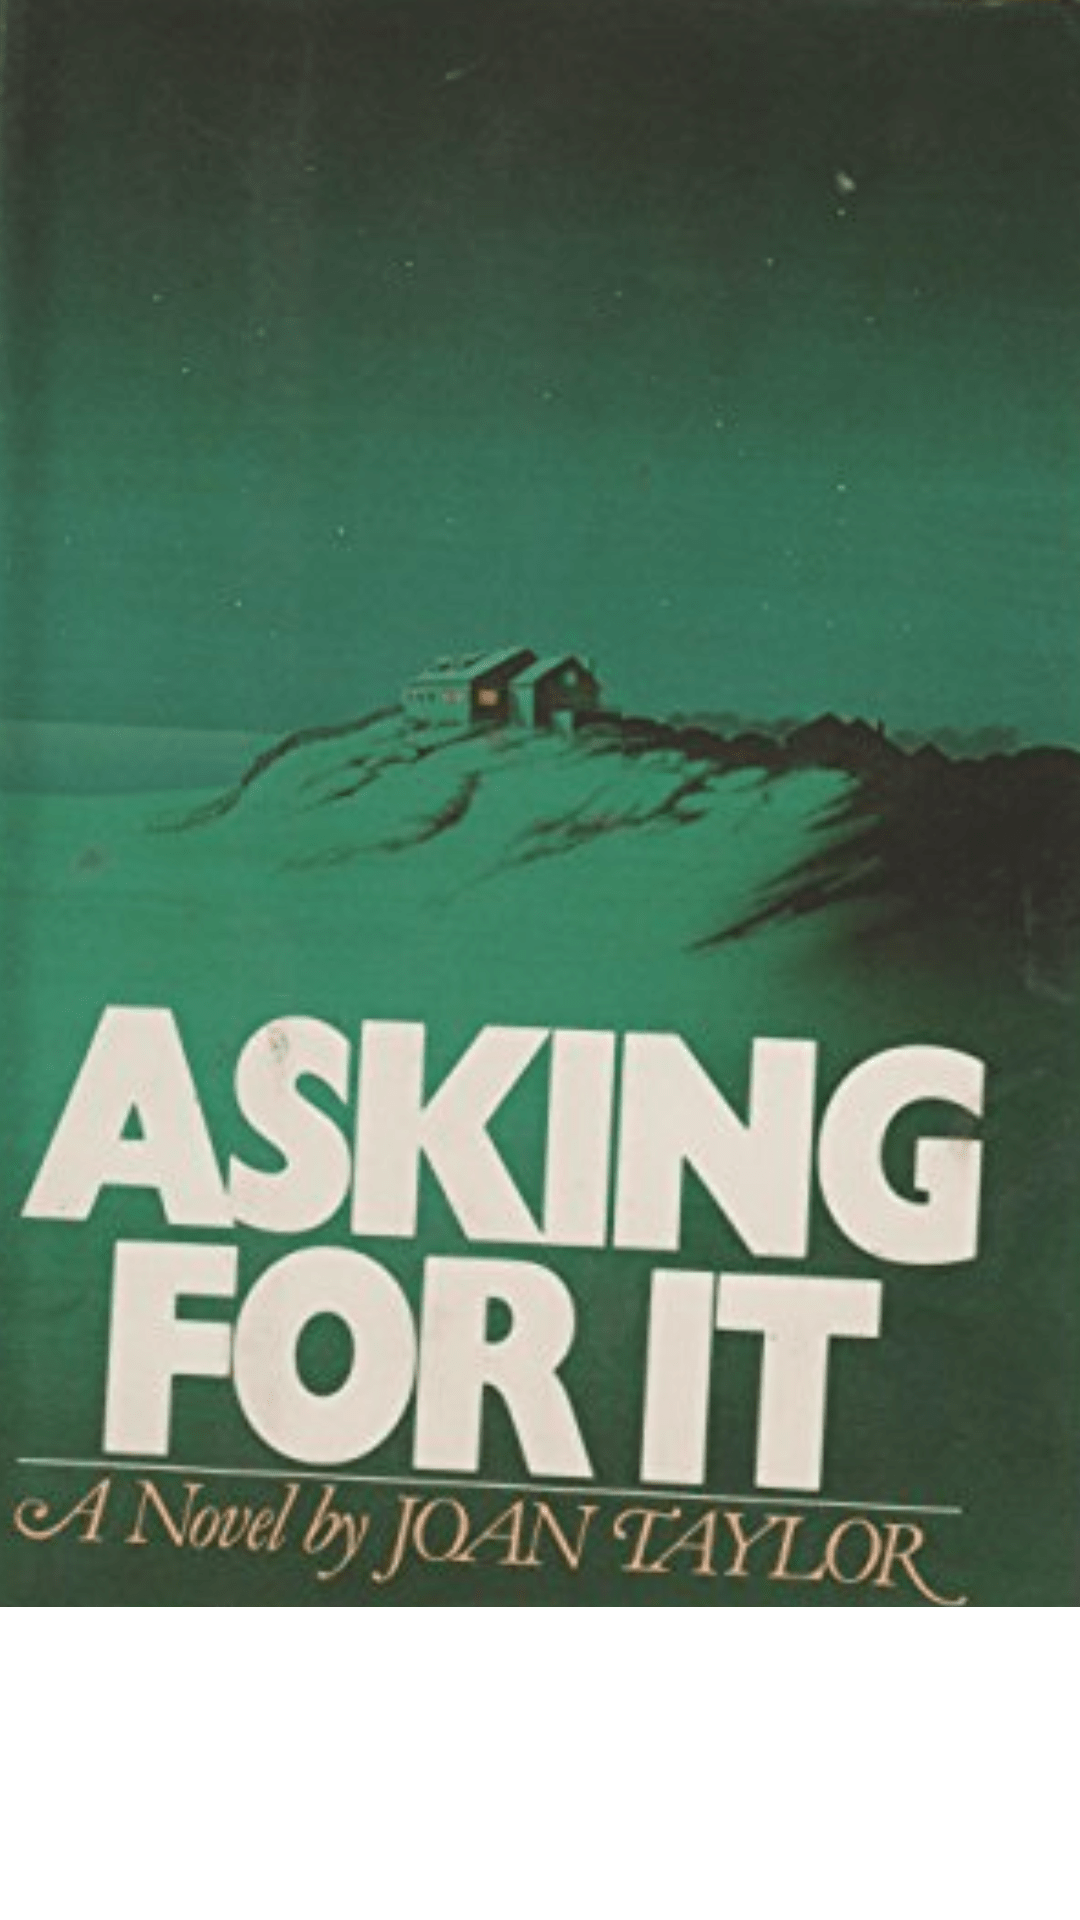 Asking for It by Joan Taylor